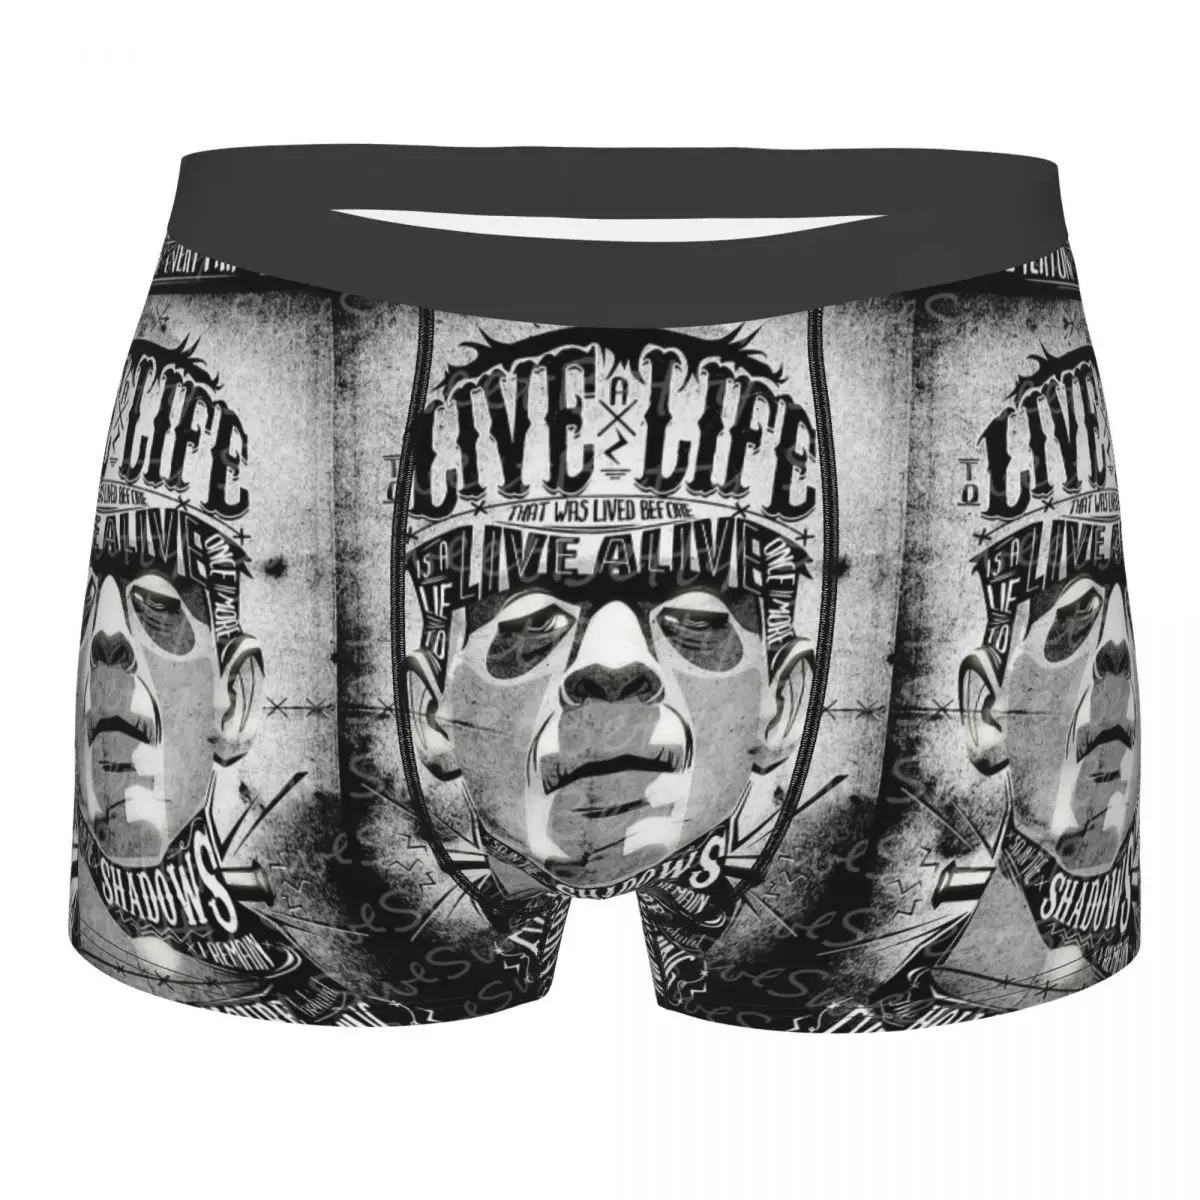 Monster Frankenstein Man's cosy Boxer Briefs,3D printing Underwear, Highly Breathable Top Quality Birthday Gifts snakeskin men s boxer briefs python skin design highly breathable underwear top quality 3d print shorts birthday gifts